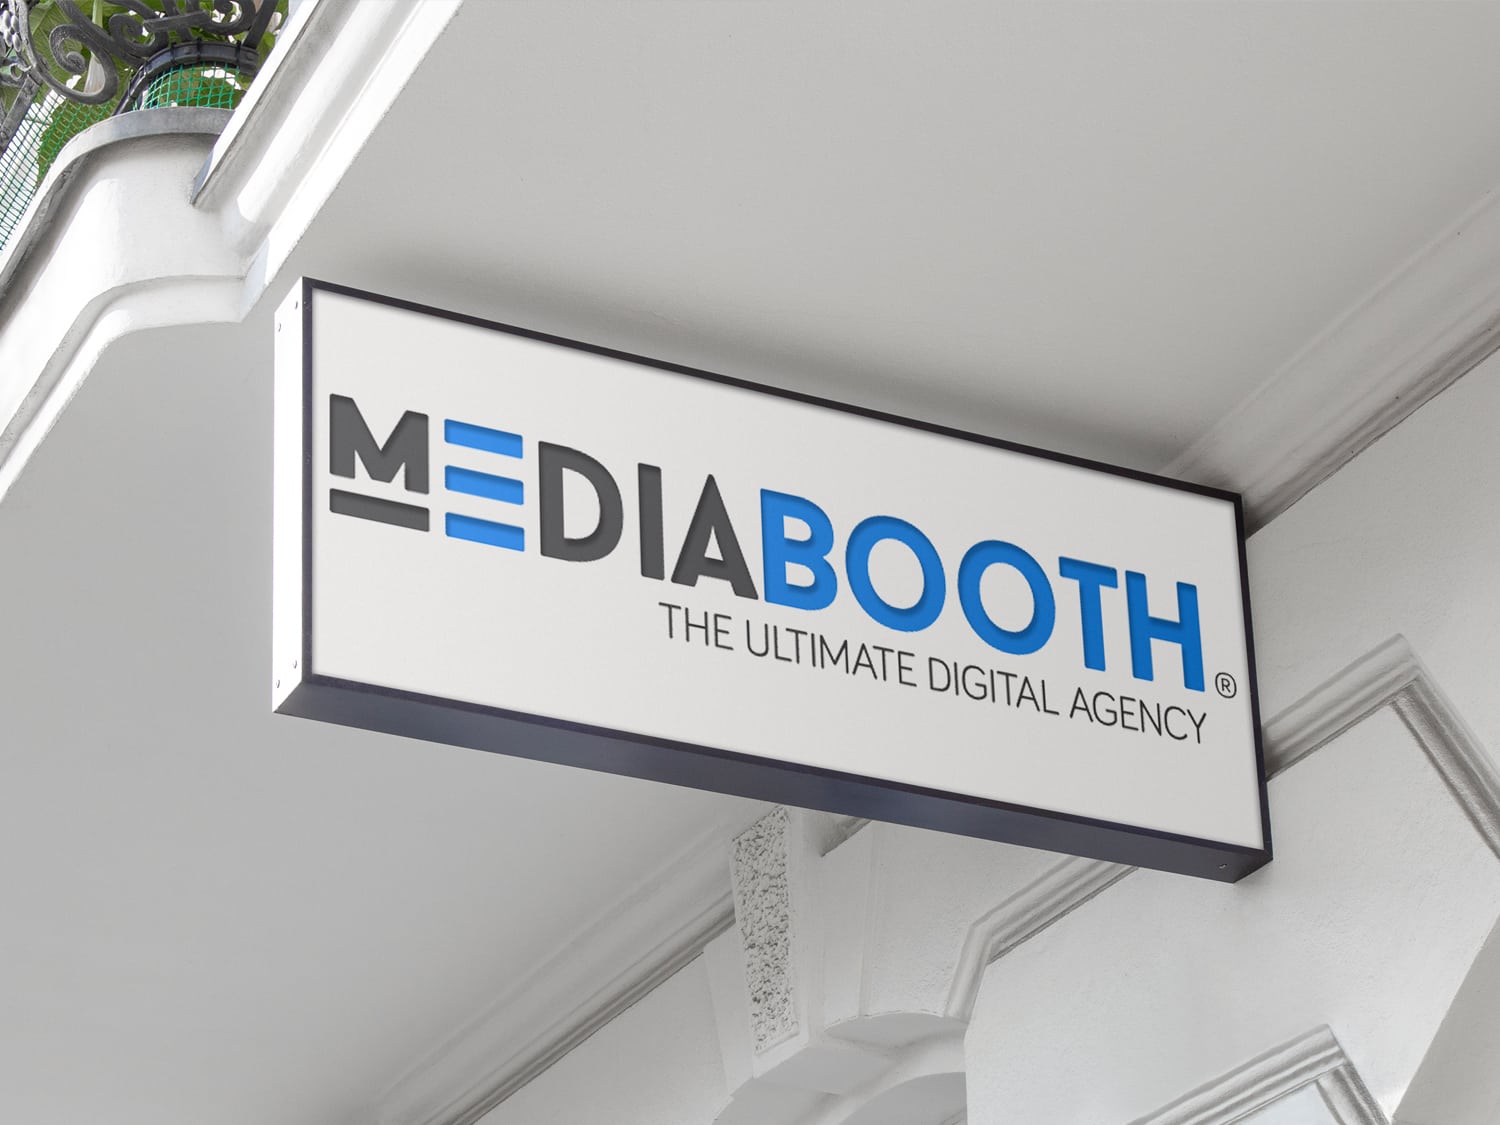 about mediabooth